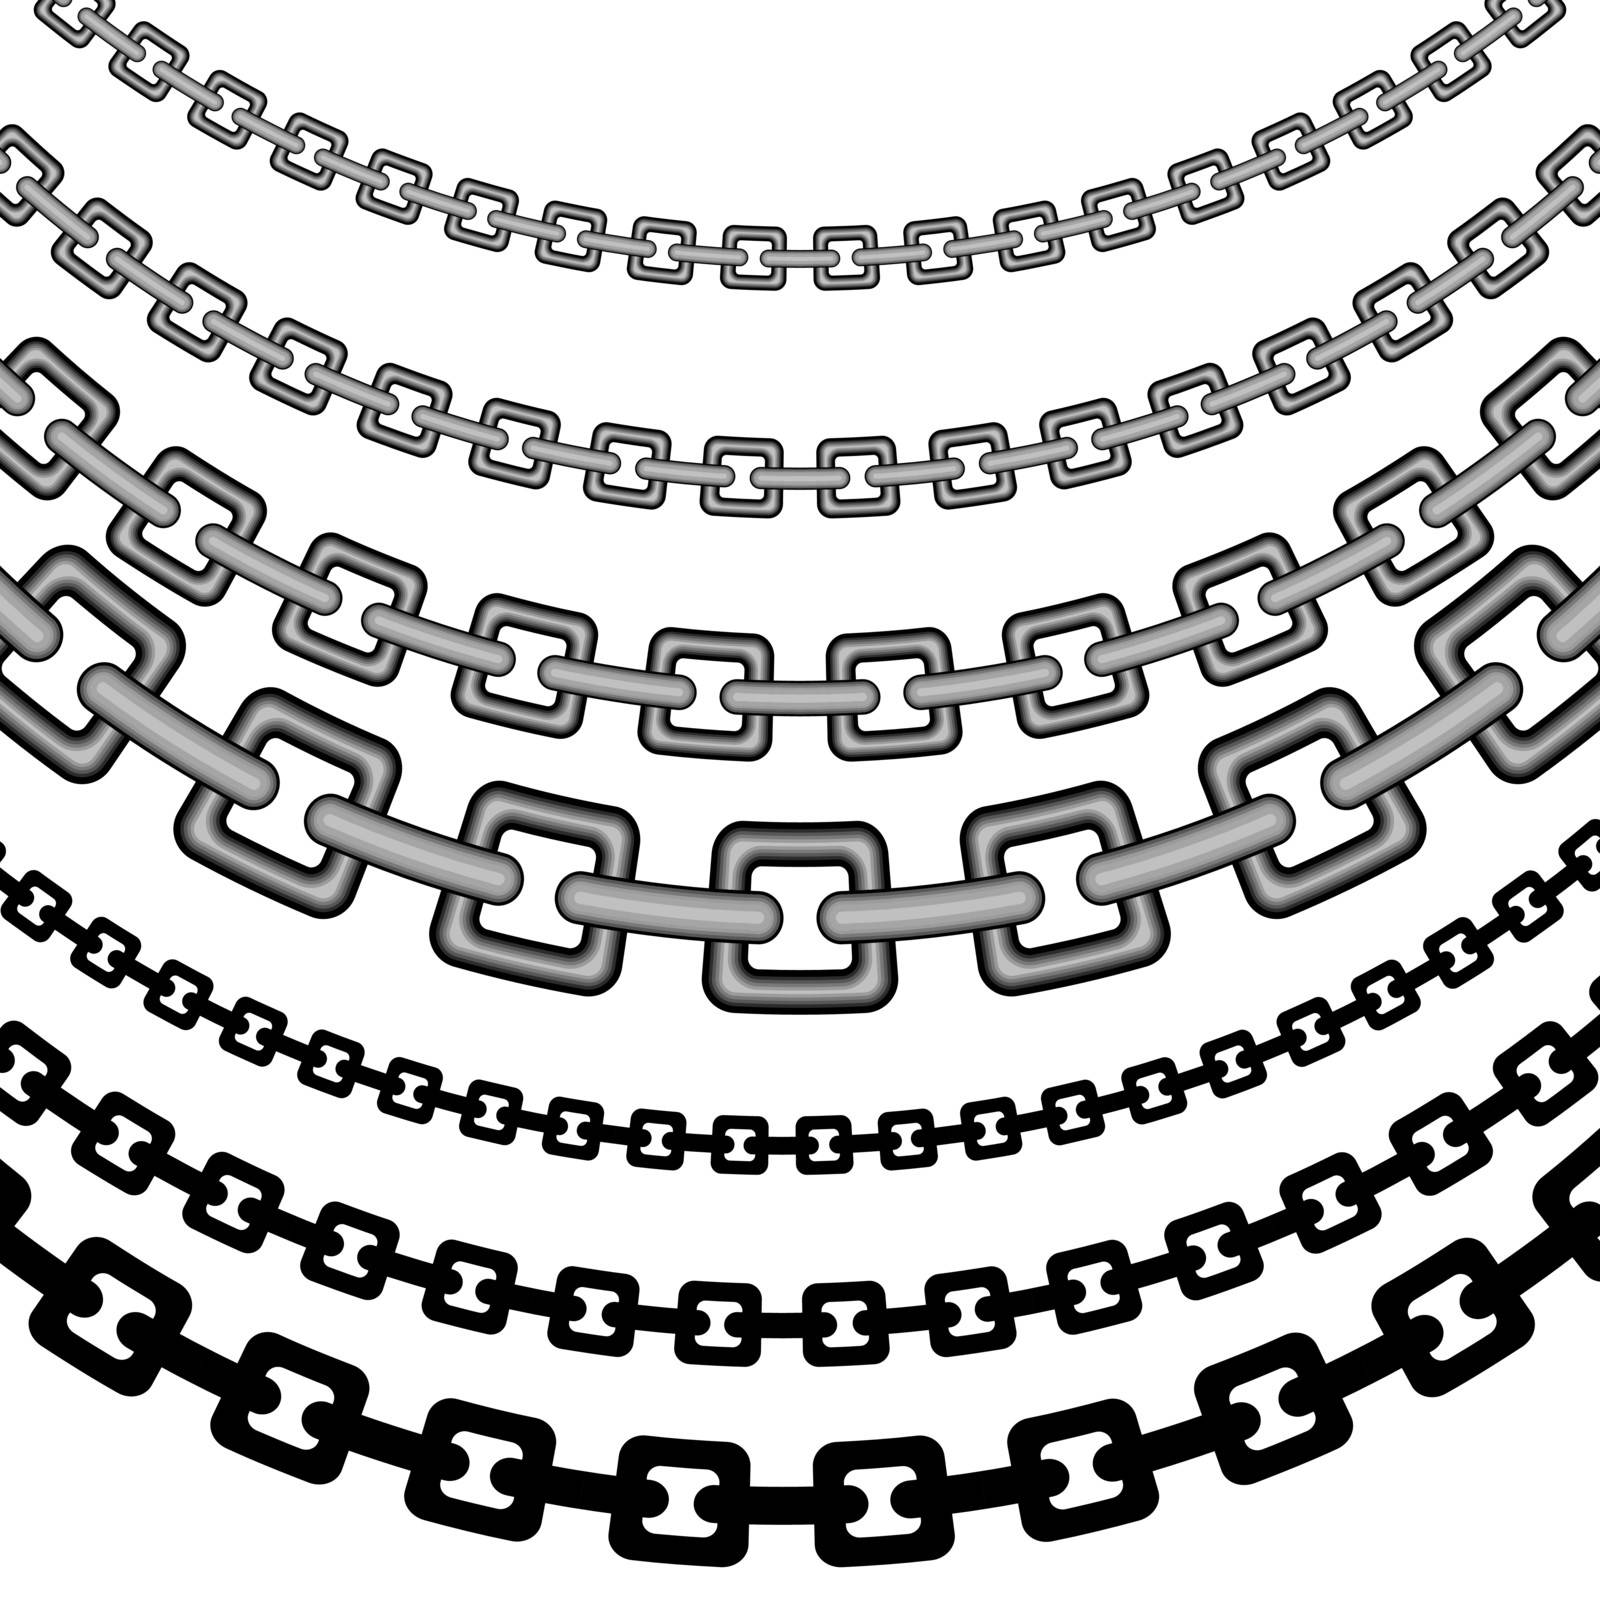 An image of a set of curved chain patterns.